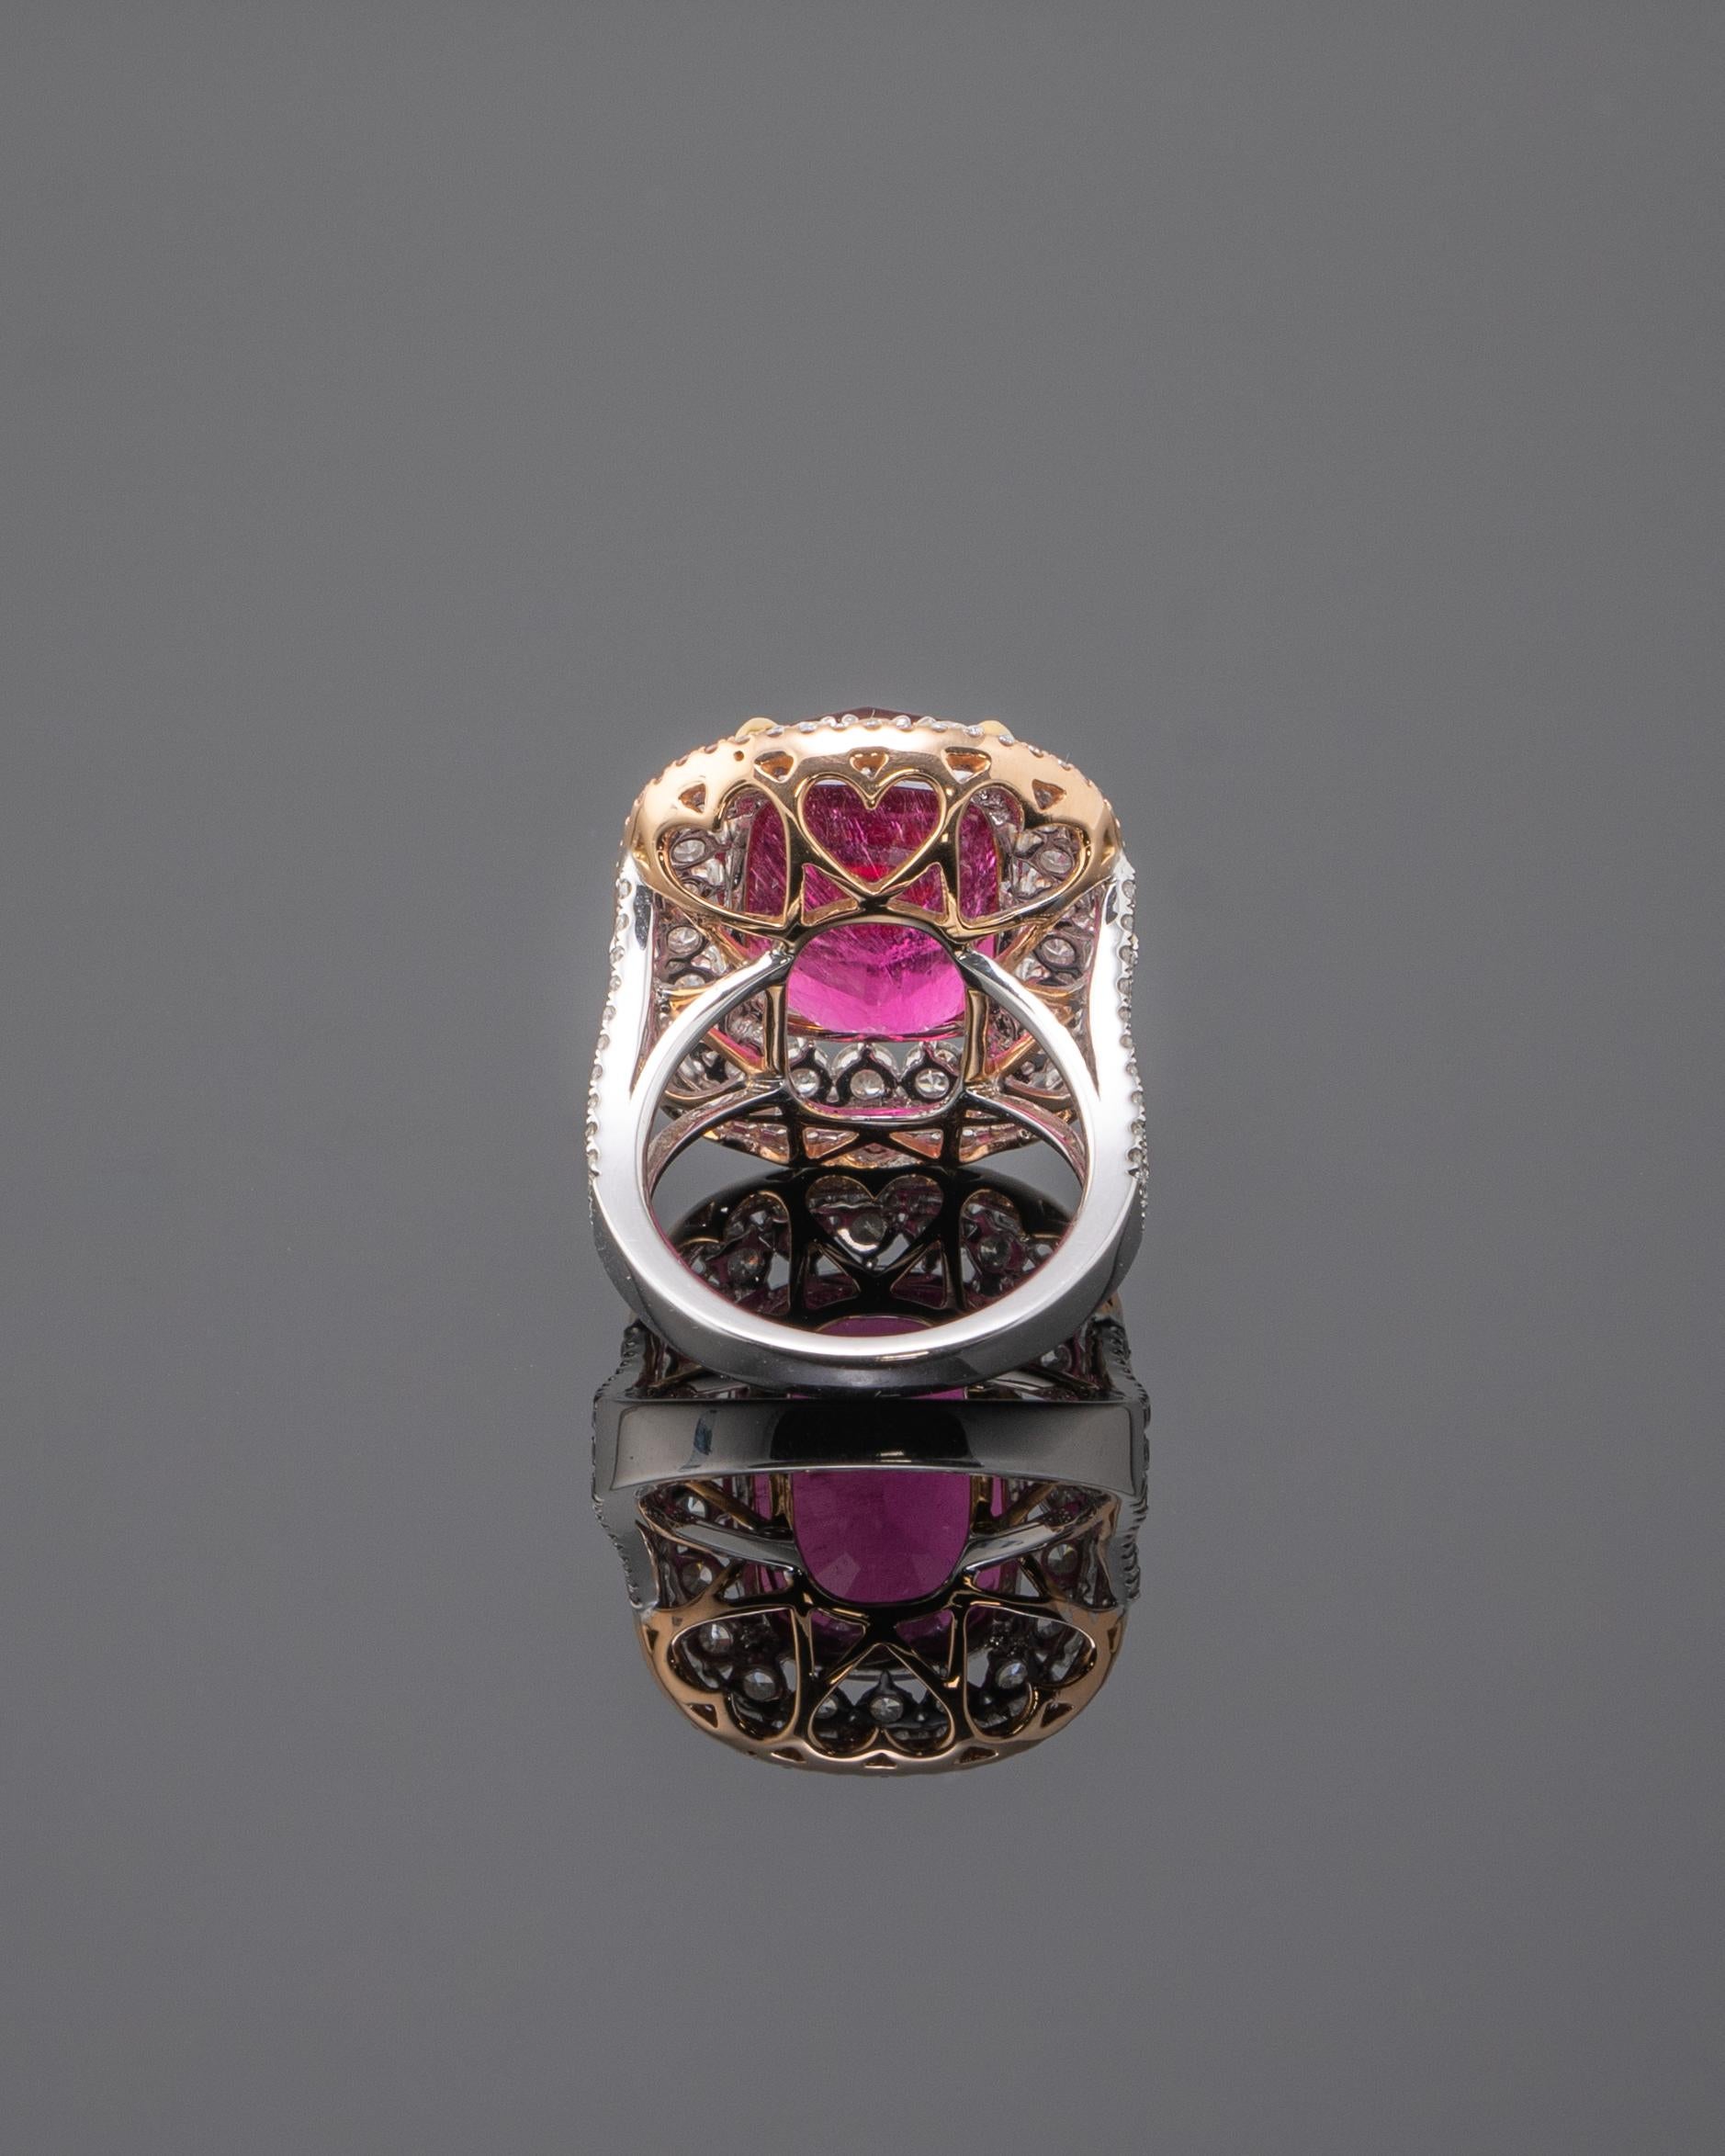 Cushion Cut 12.56 Carat Cushion Shaped Tourmaline Rubellite and Diamond Cocktail Ring For Sale